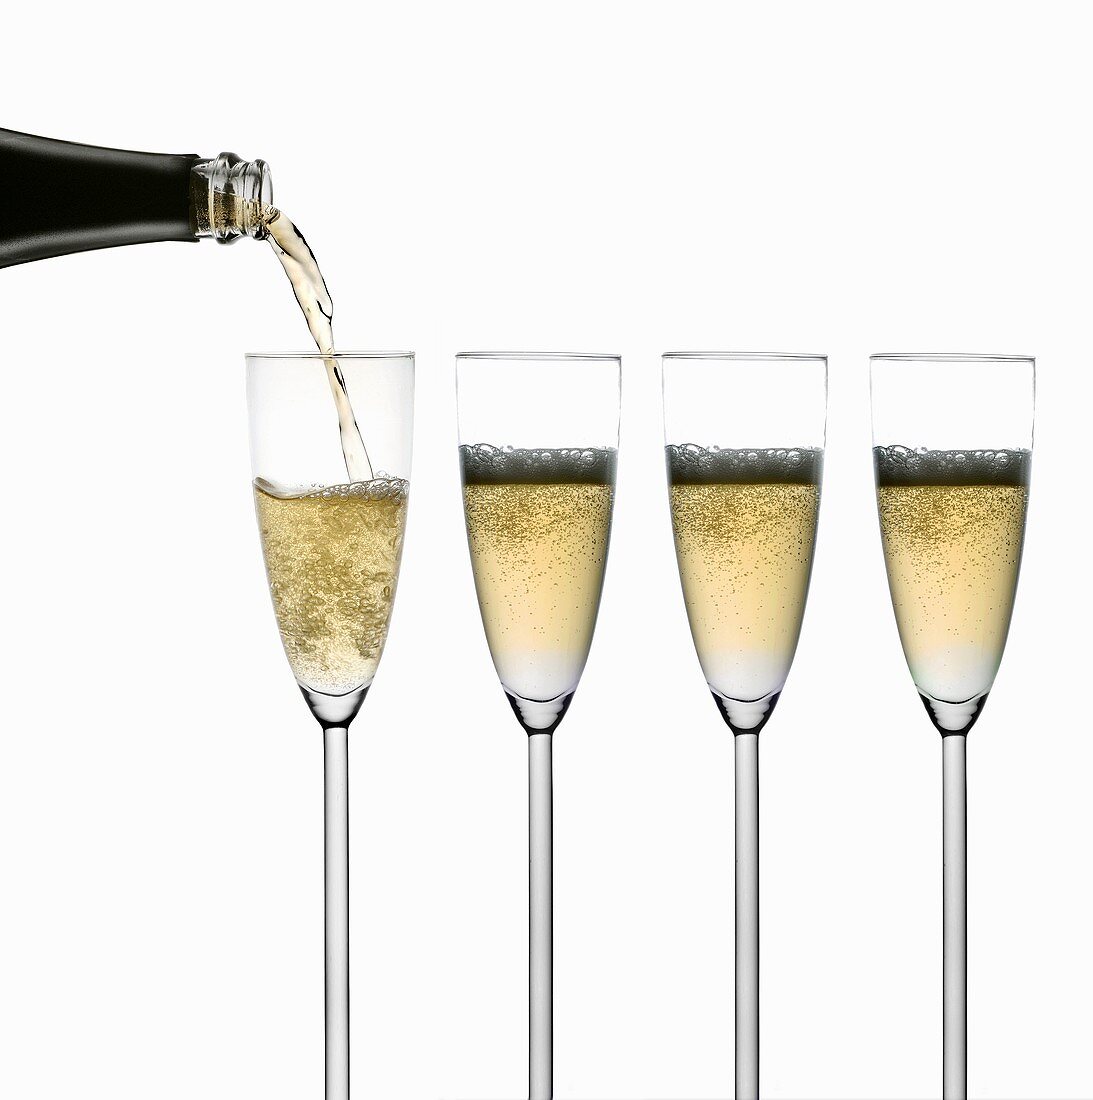 Pouring sparkling wine into glasses